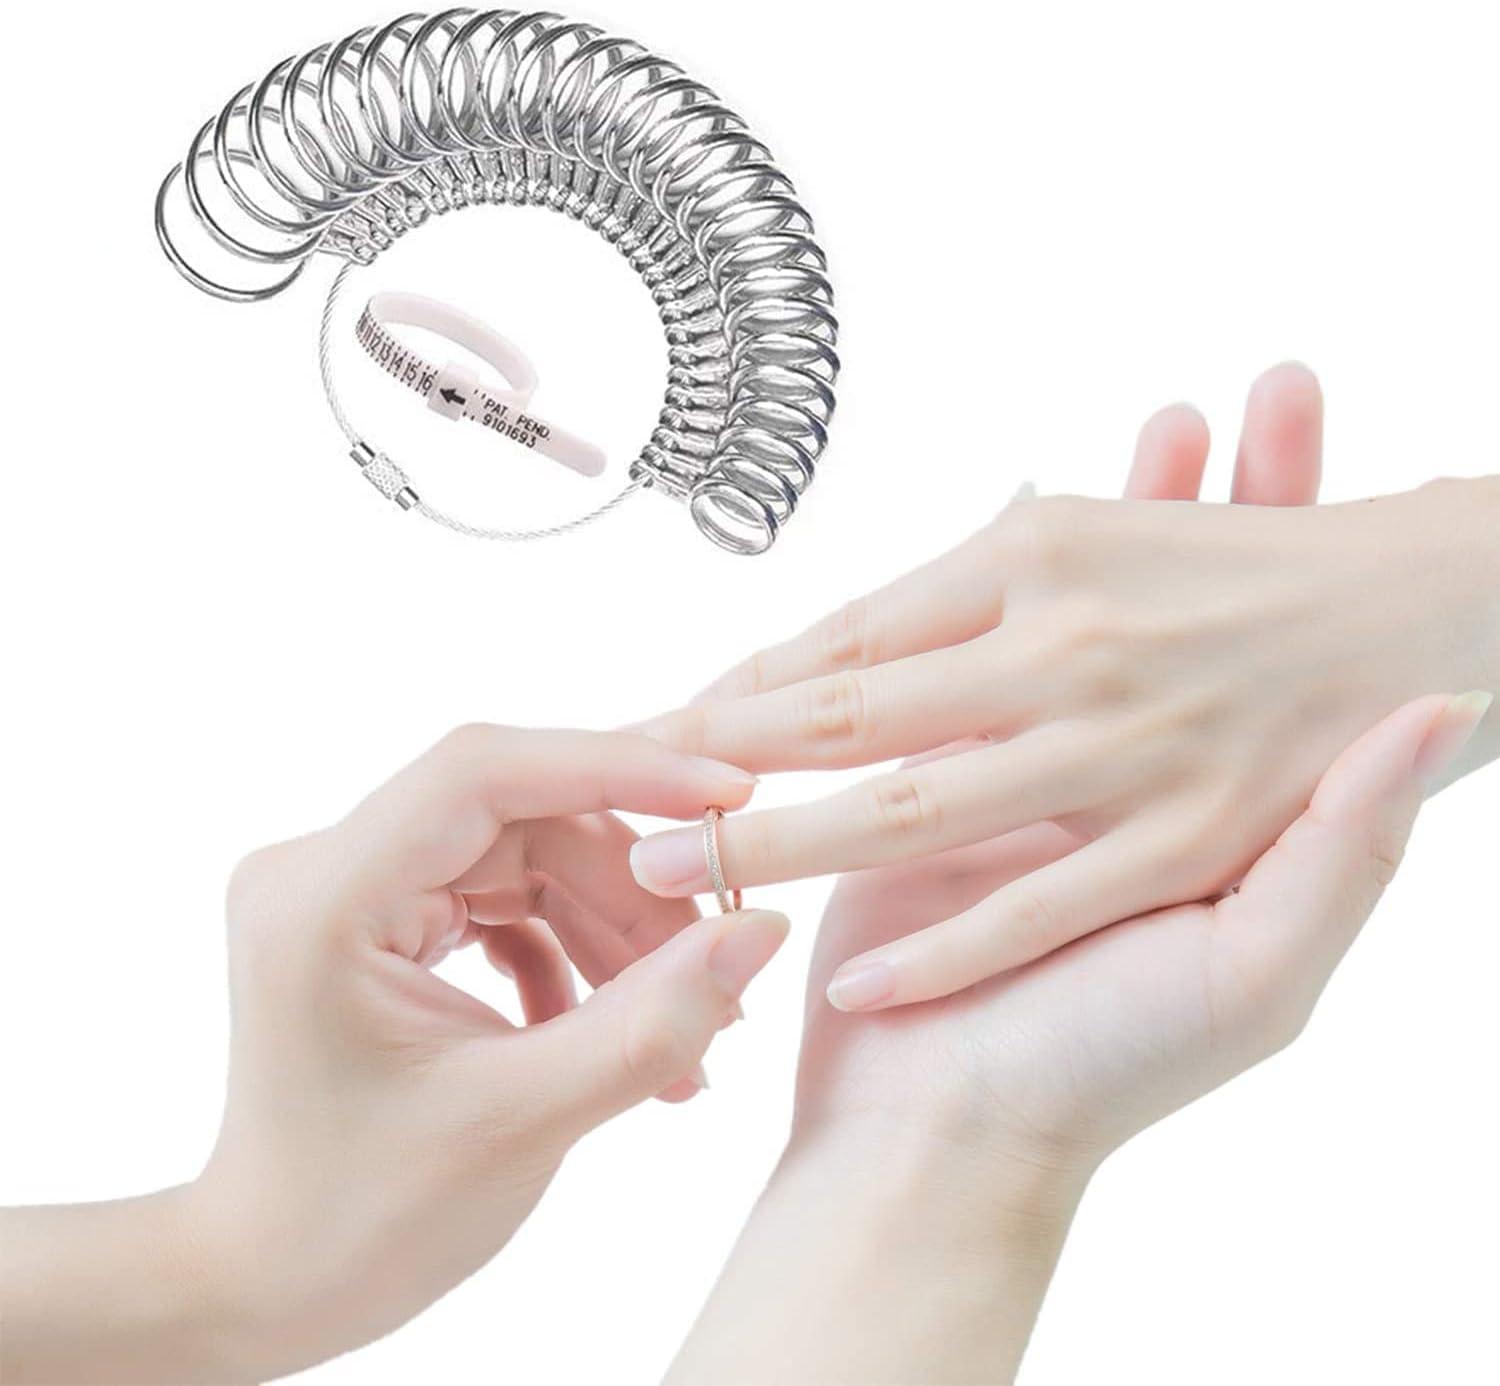 27pcs Ring Size Measuring Tool Set - Accurately Measure Your Finger for the  Perfect Fit!